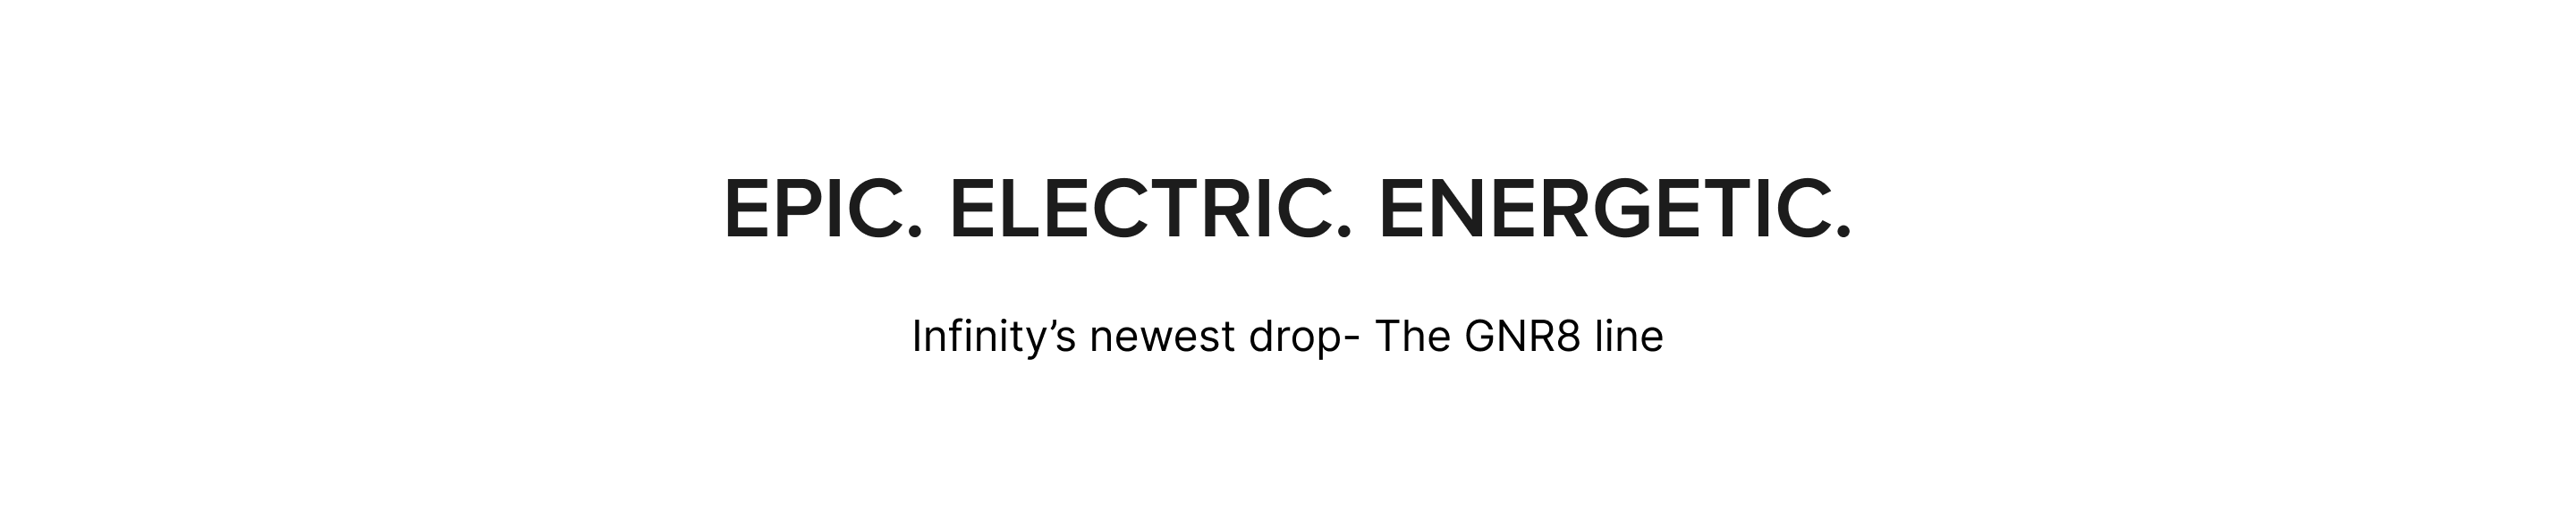 Infinity's newest drop - the GNR8 line. Epic. Electric. Energetic.